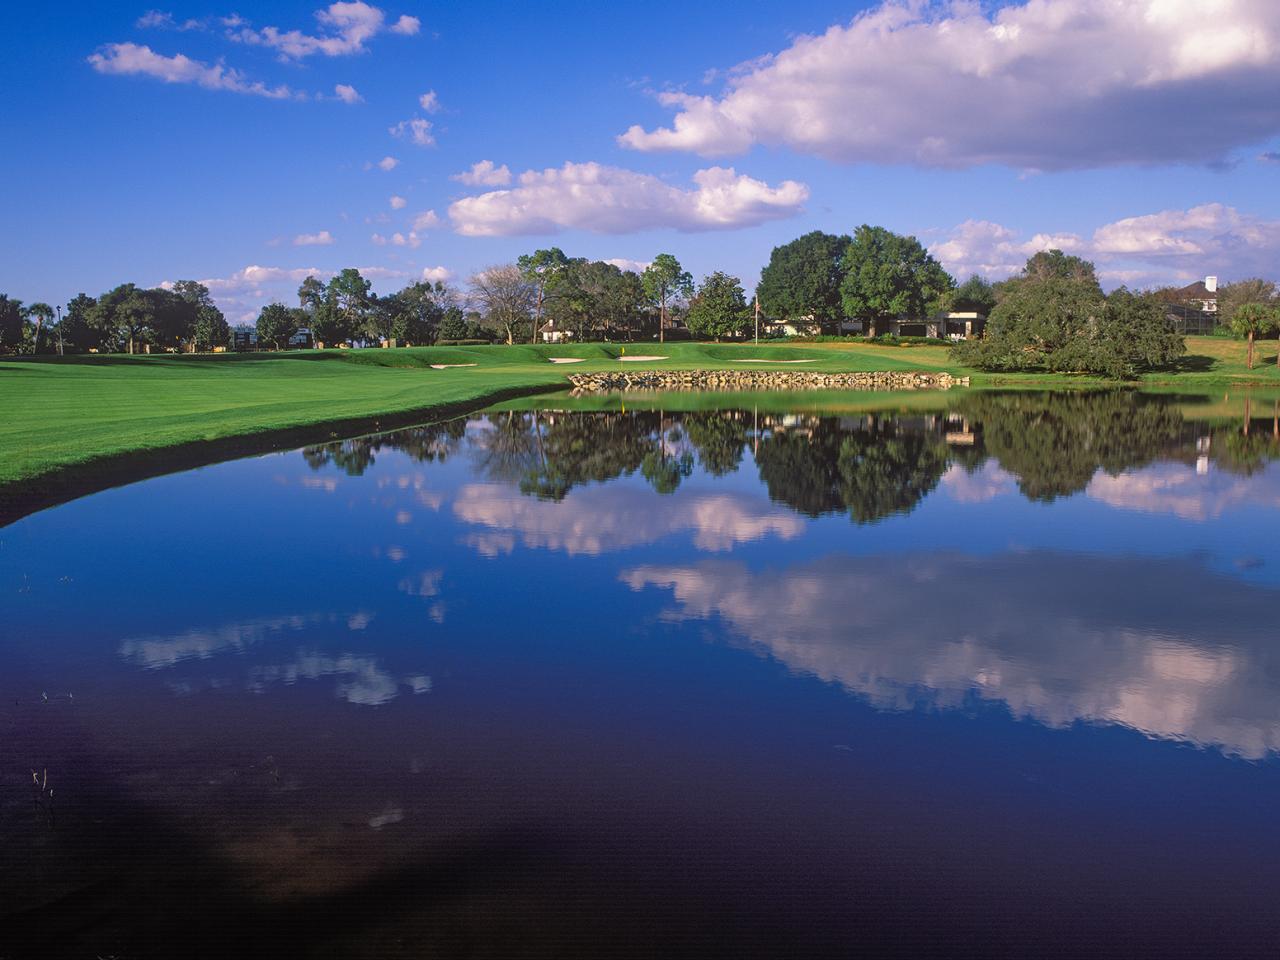 Four things to know about the Bay Hill Championship Course